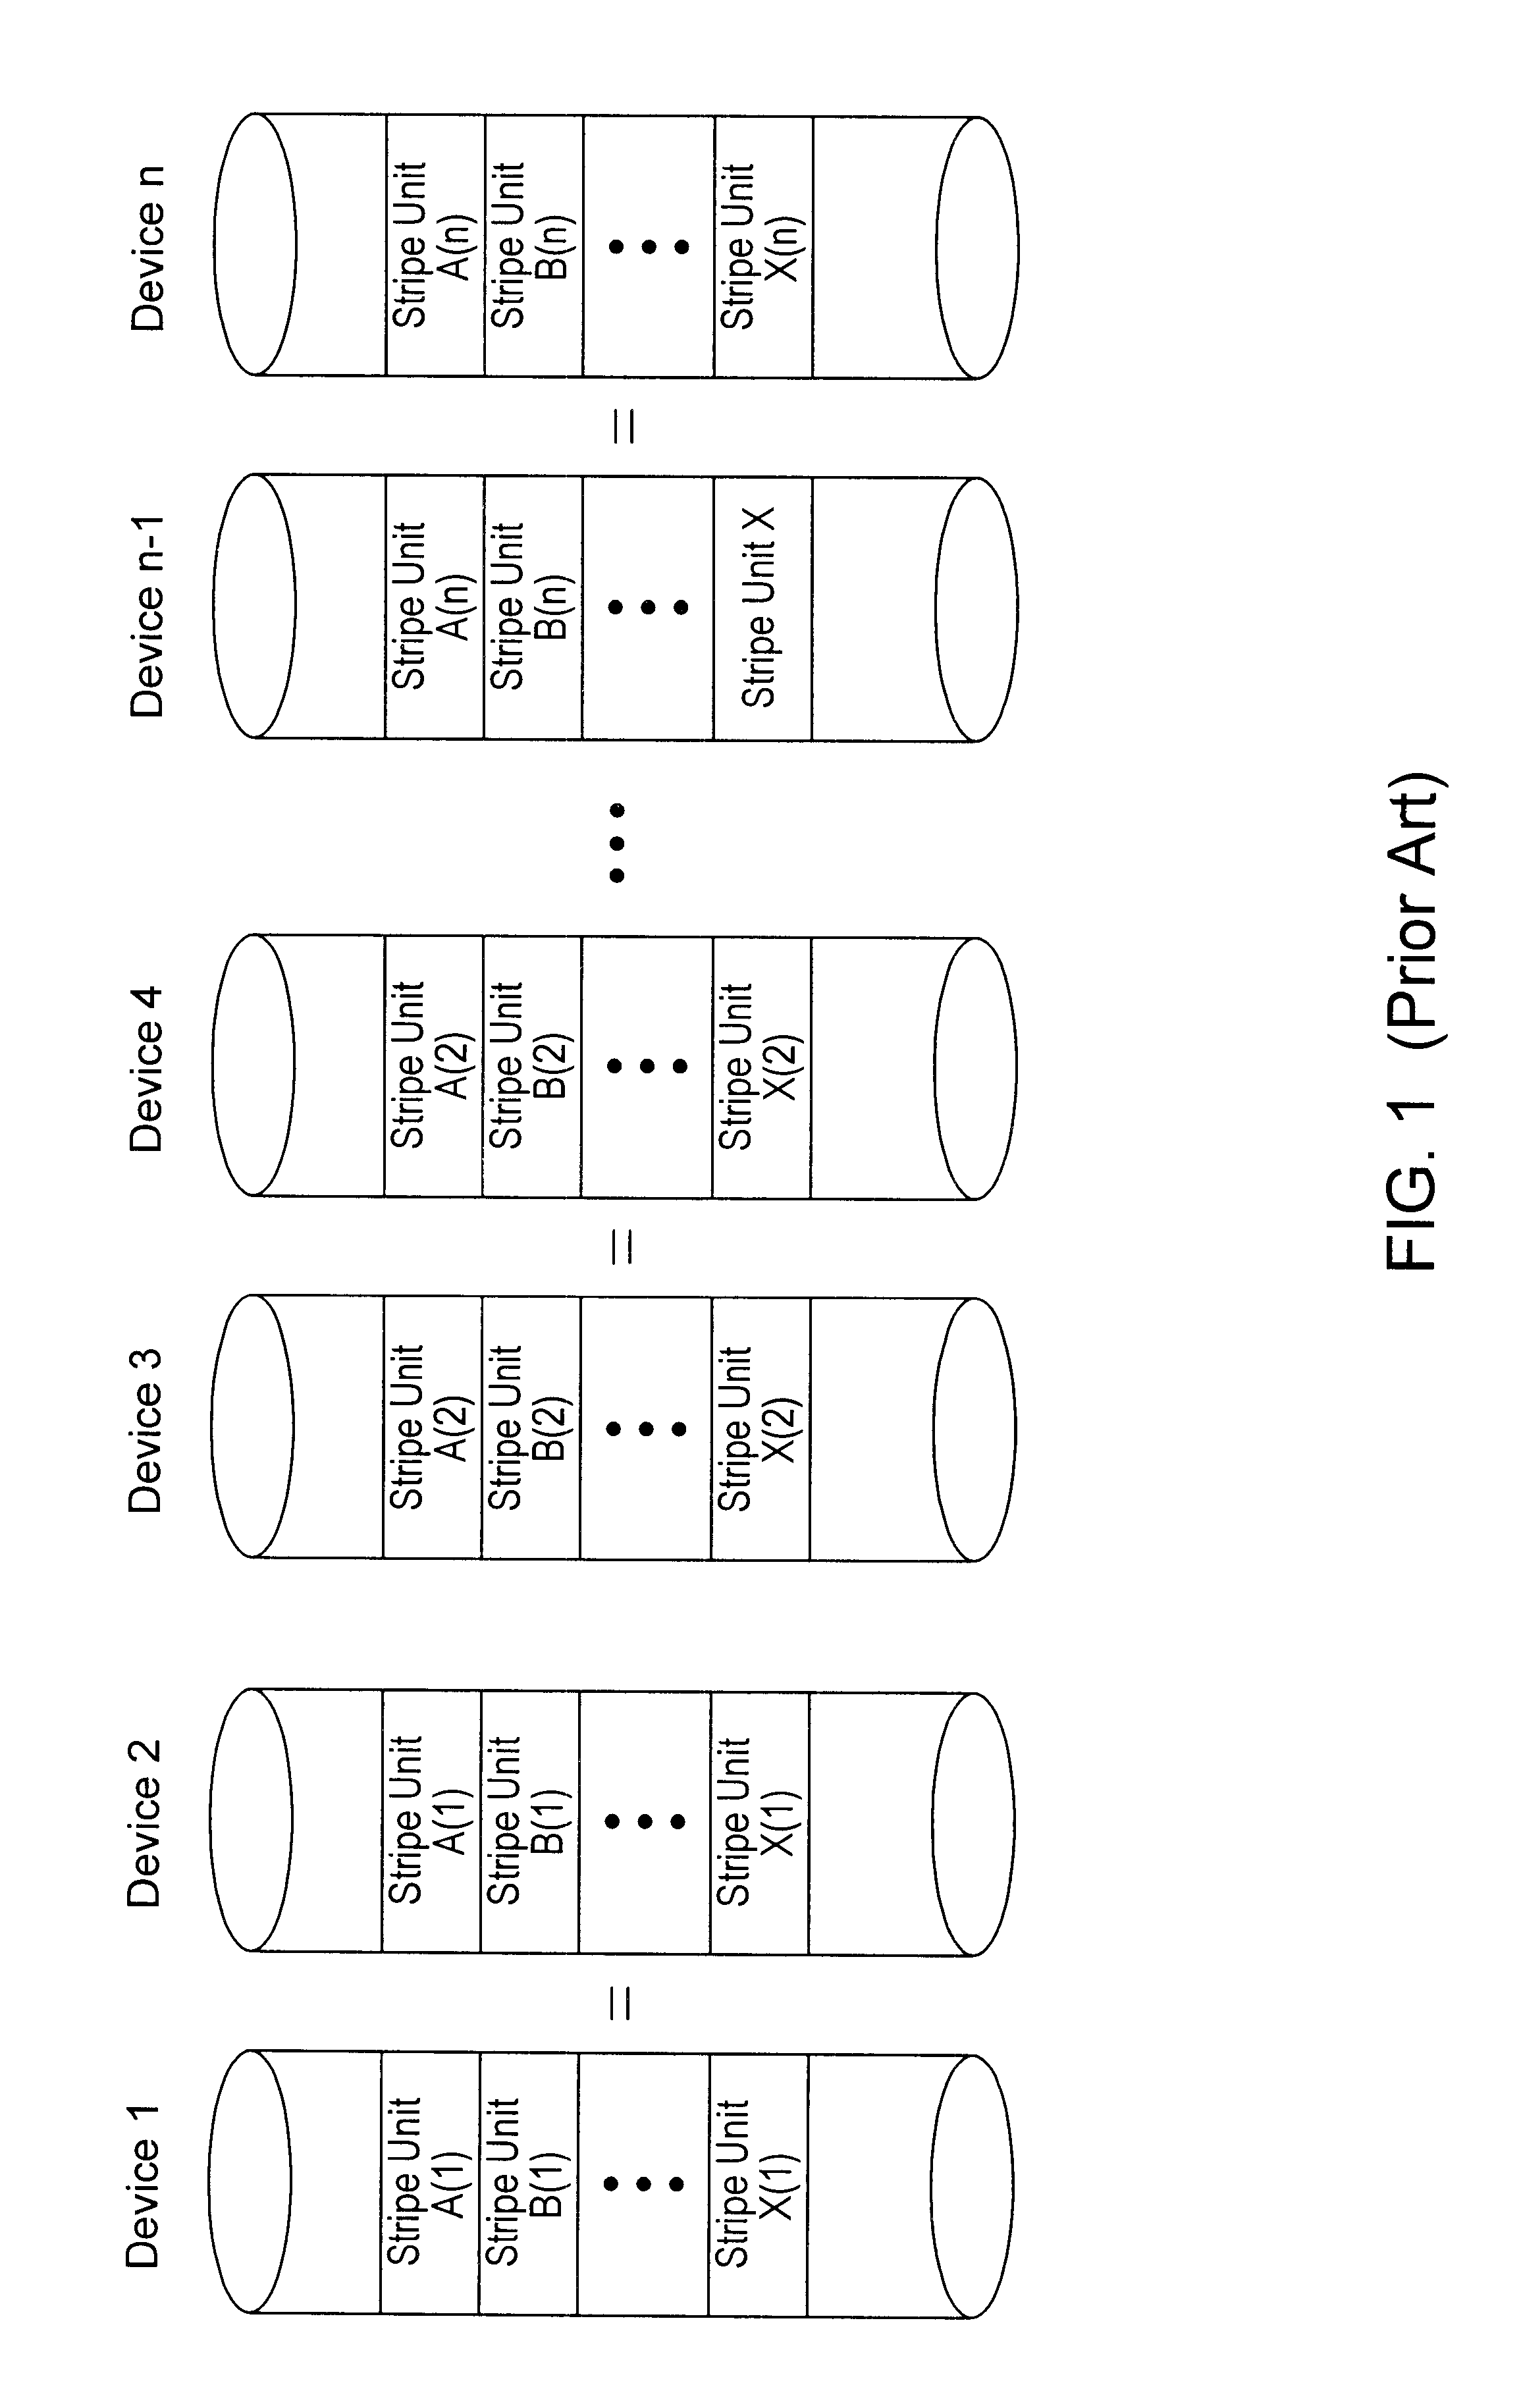 Load balancing configuration for storage arrays employing mirroring and striping